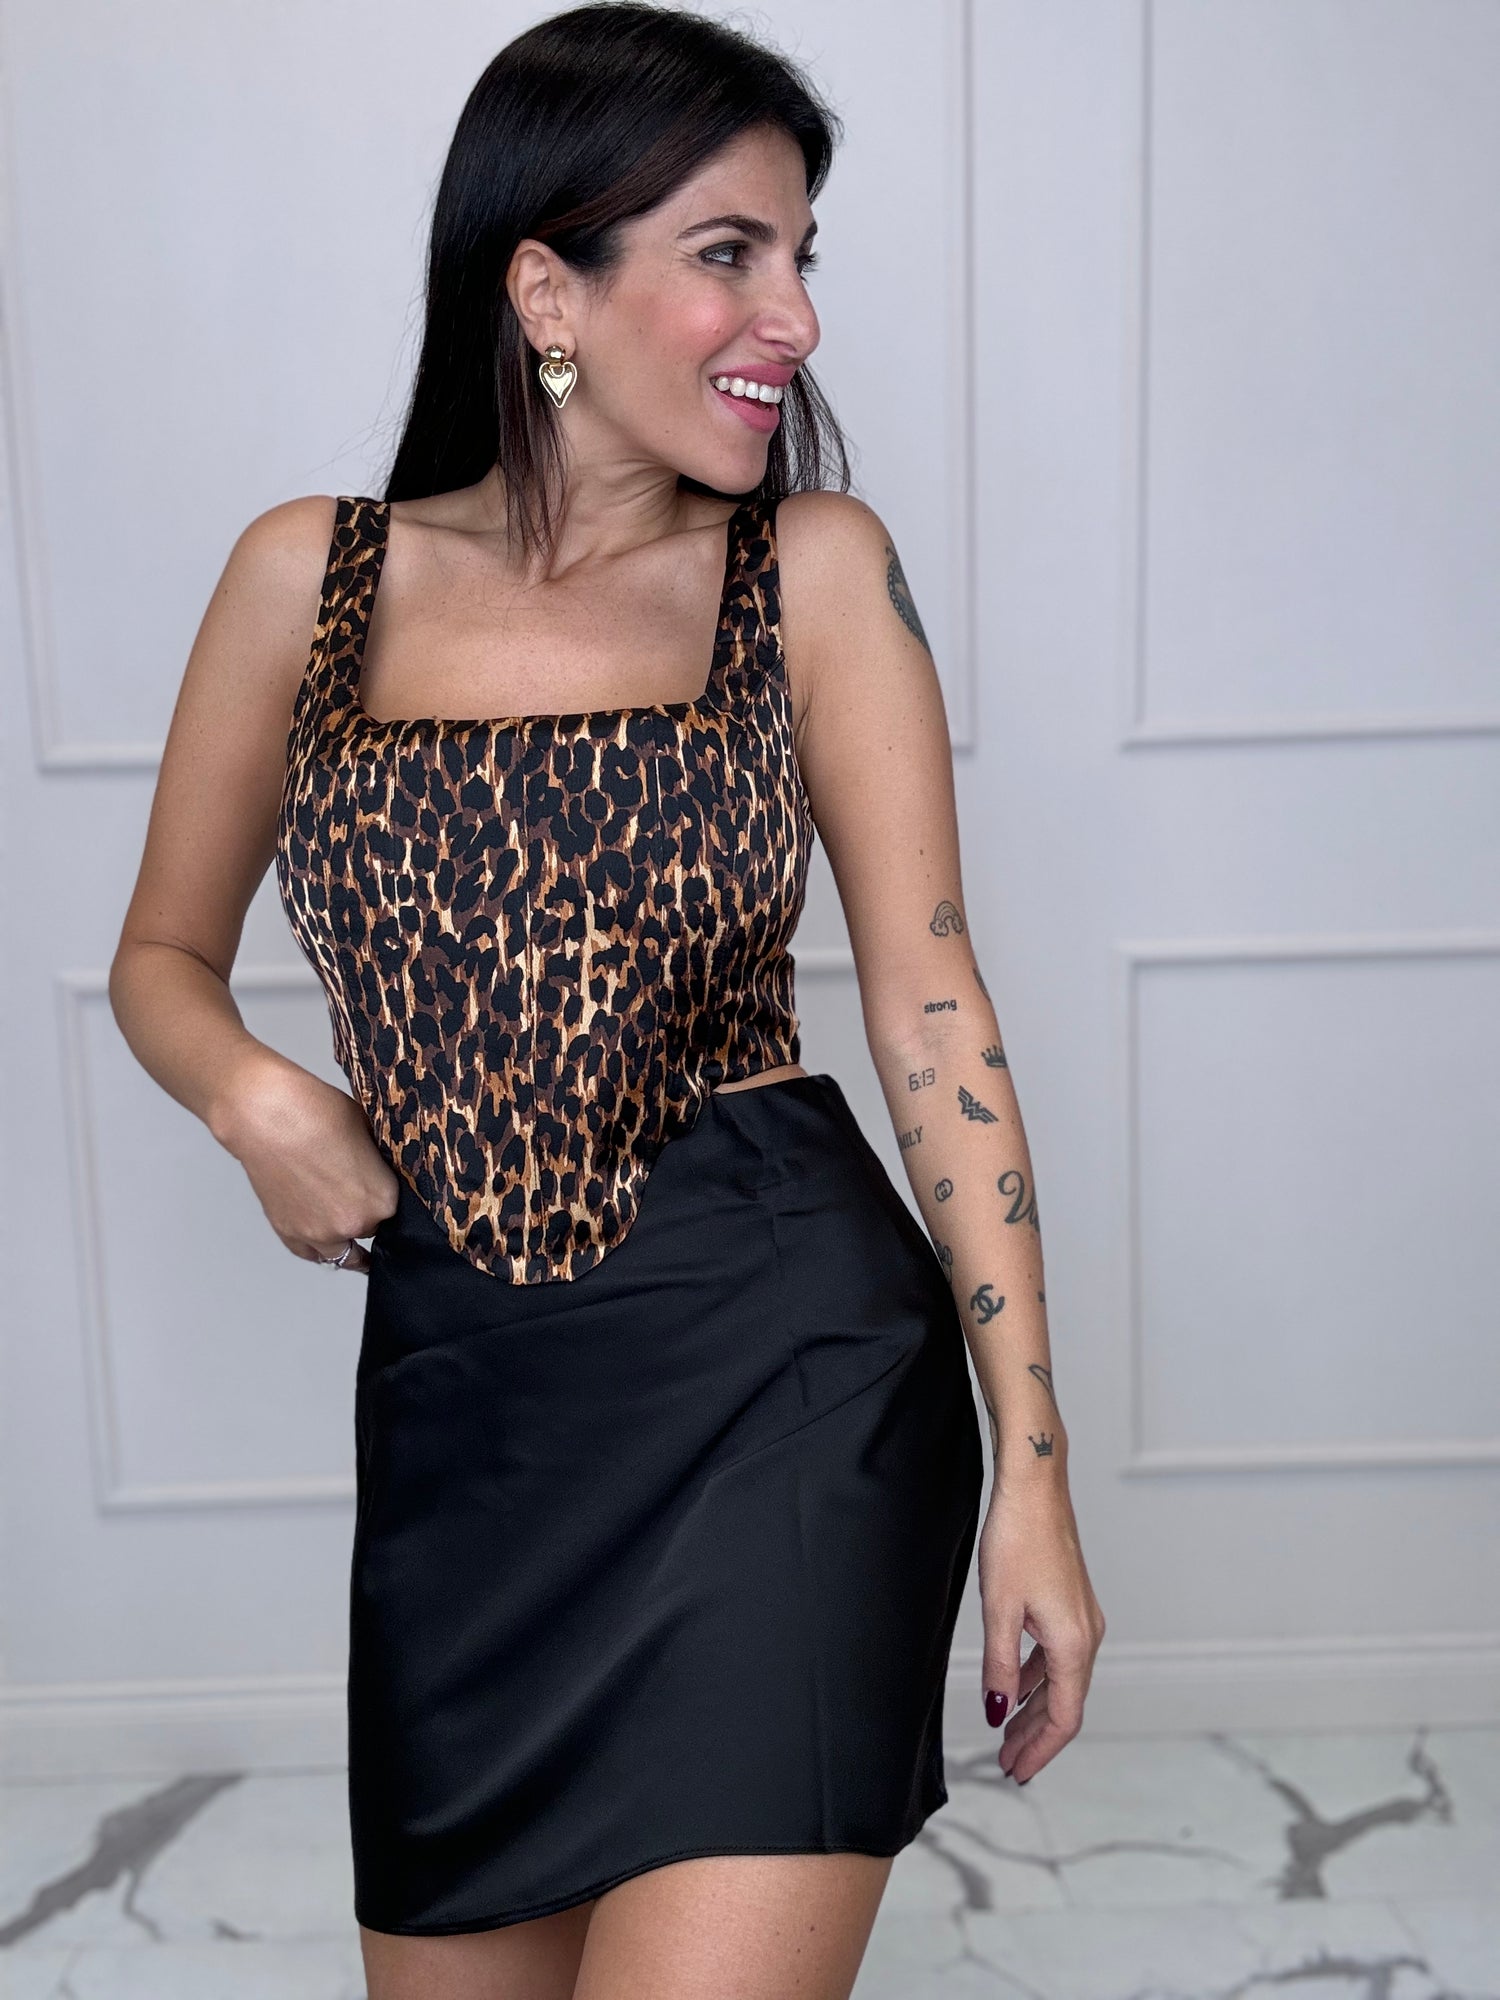 Top Corpetto “Leopard” GLAMOROUS